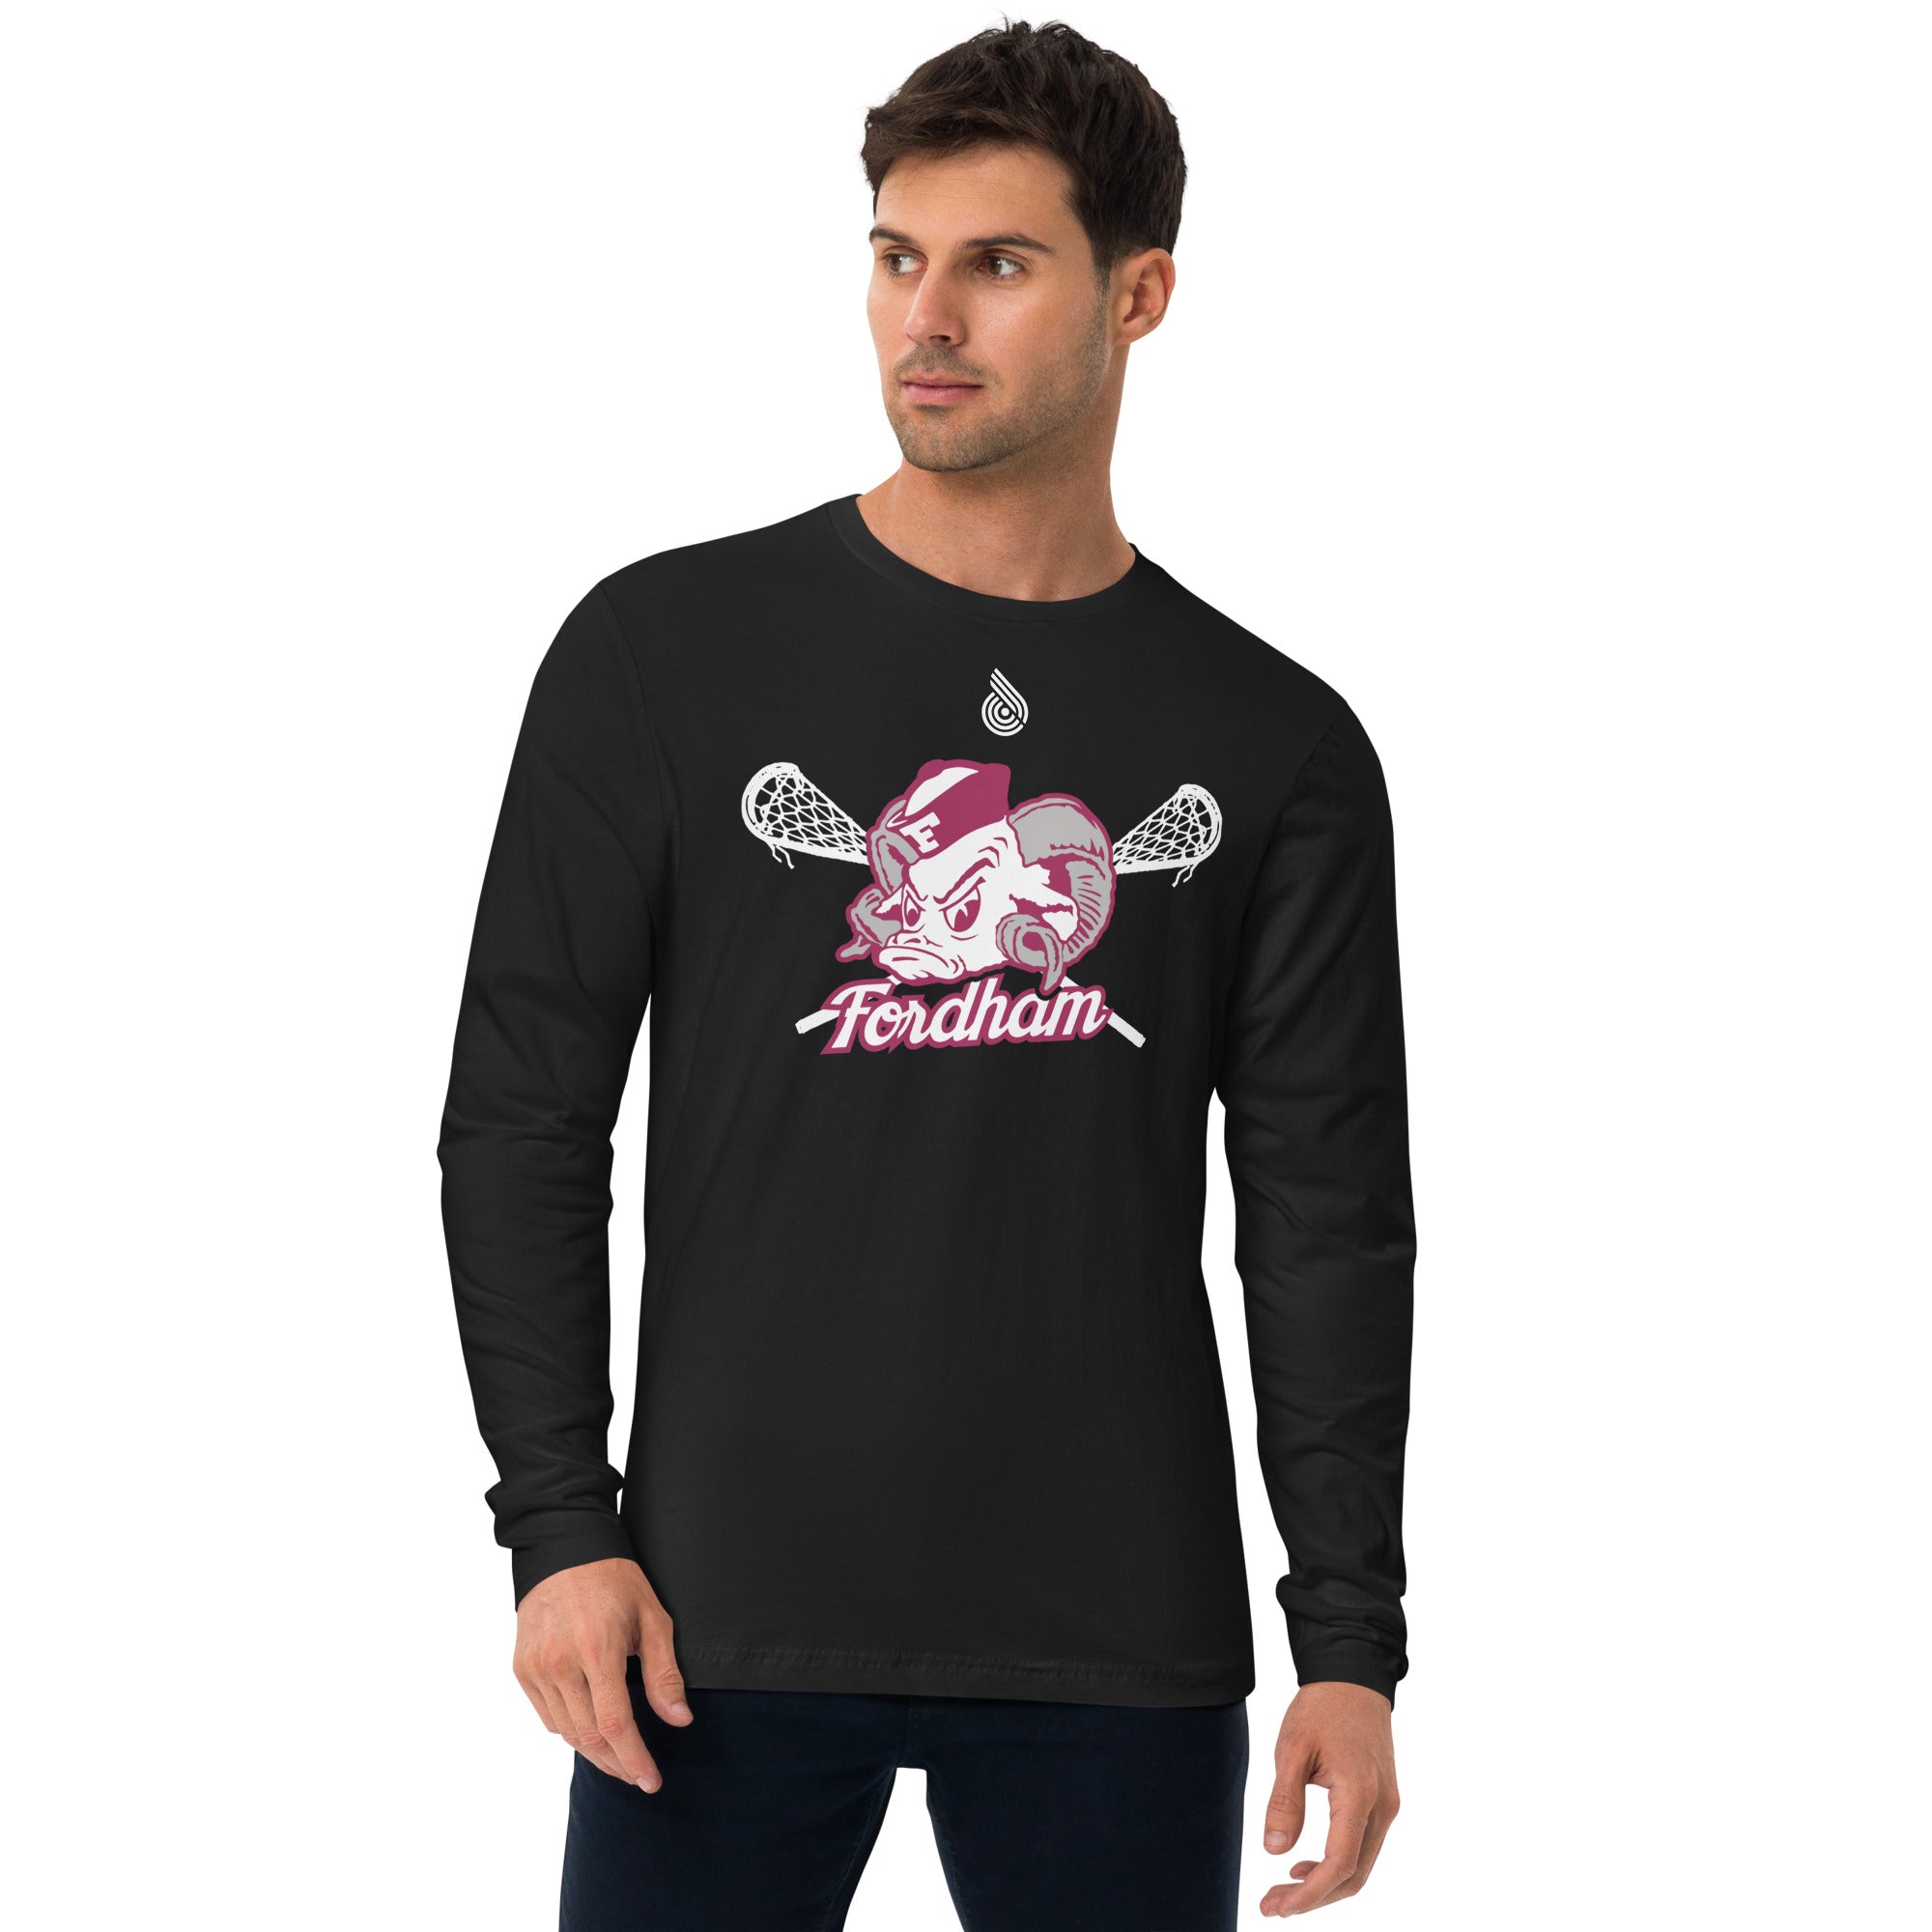 Fordham Long Sleeve Fitted Crew